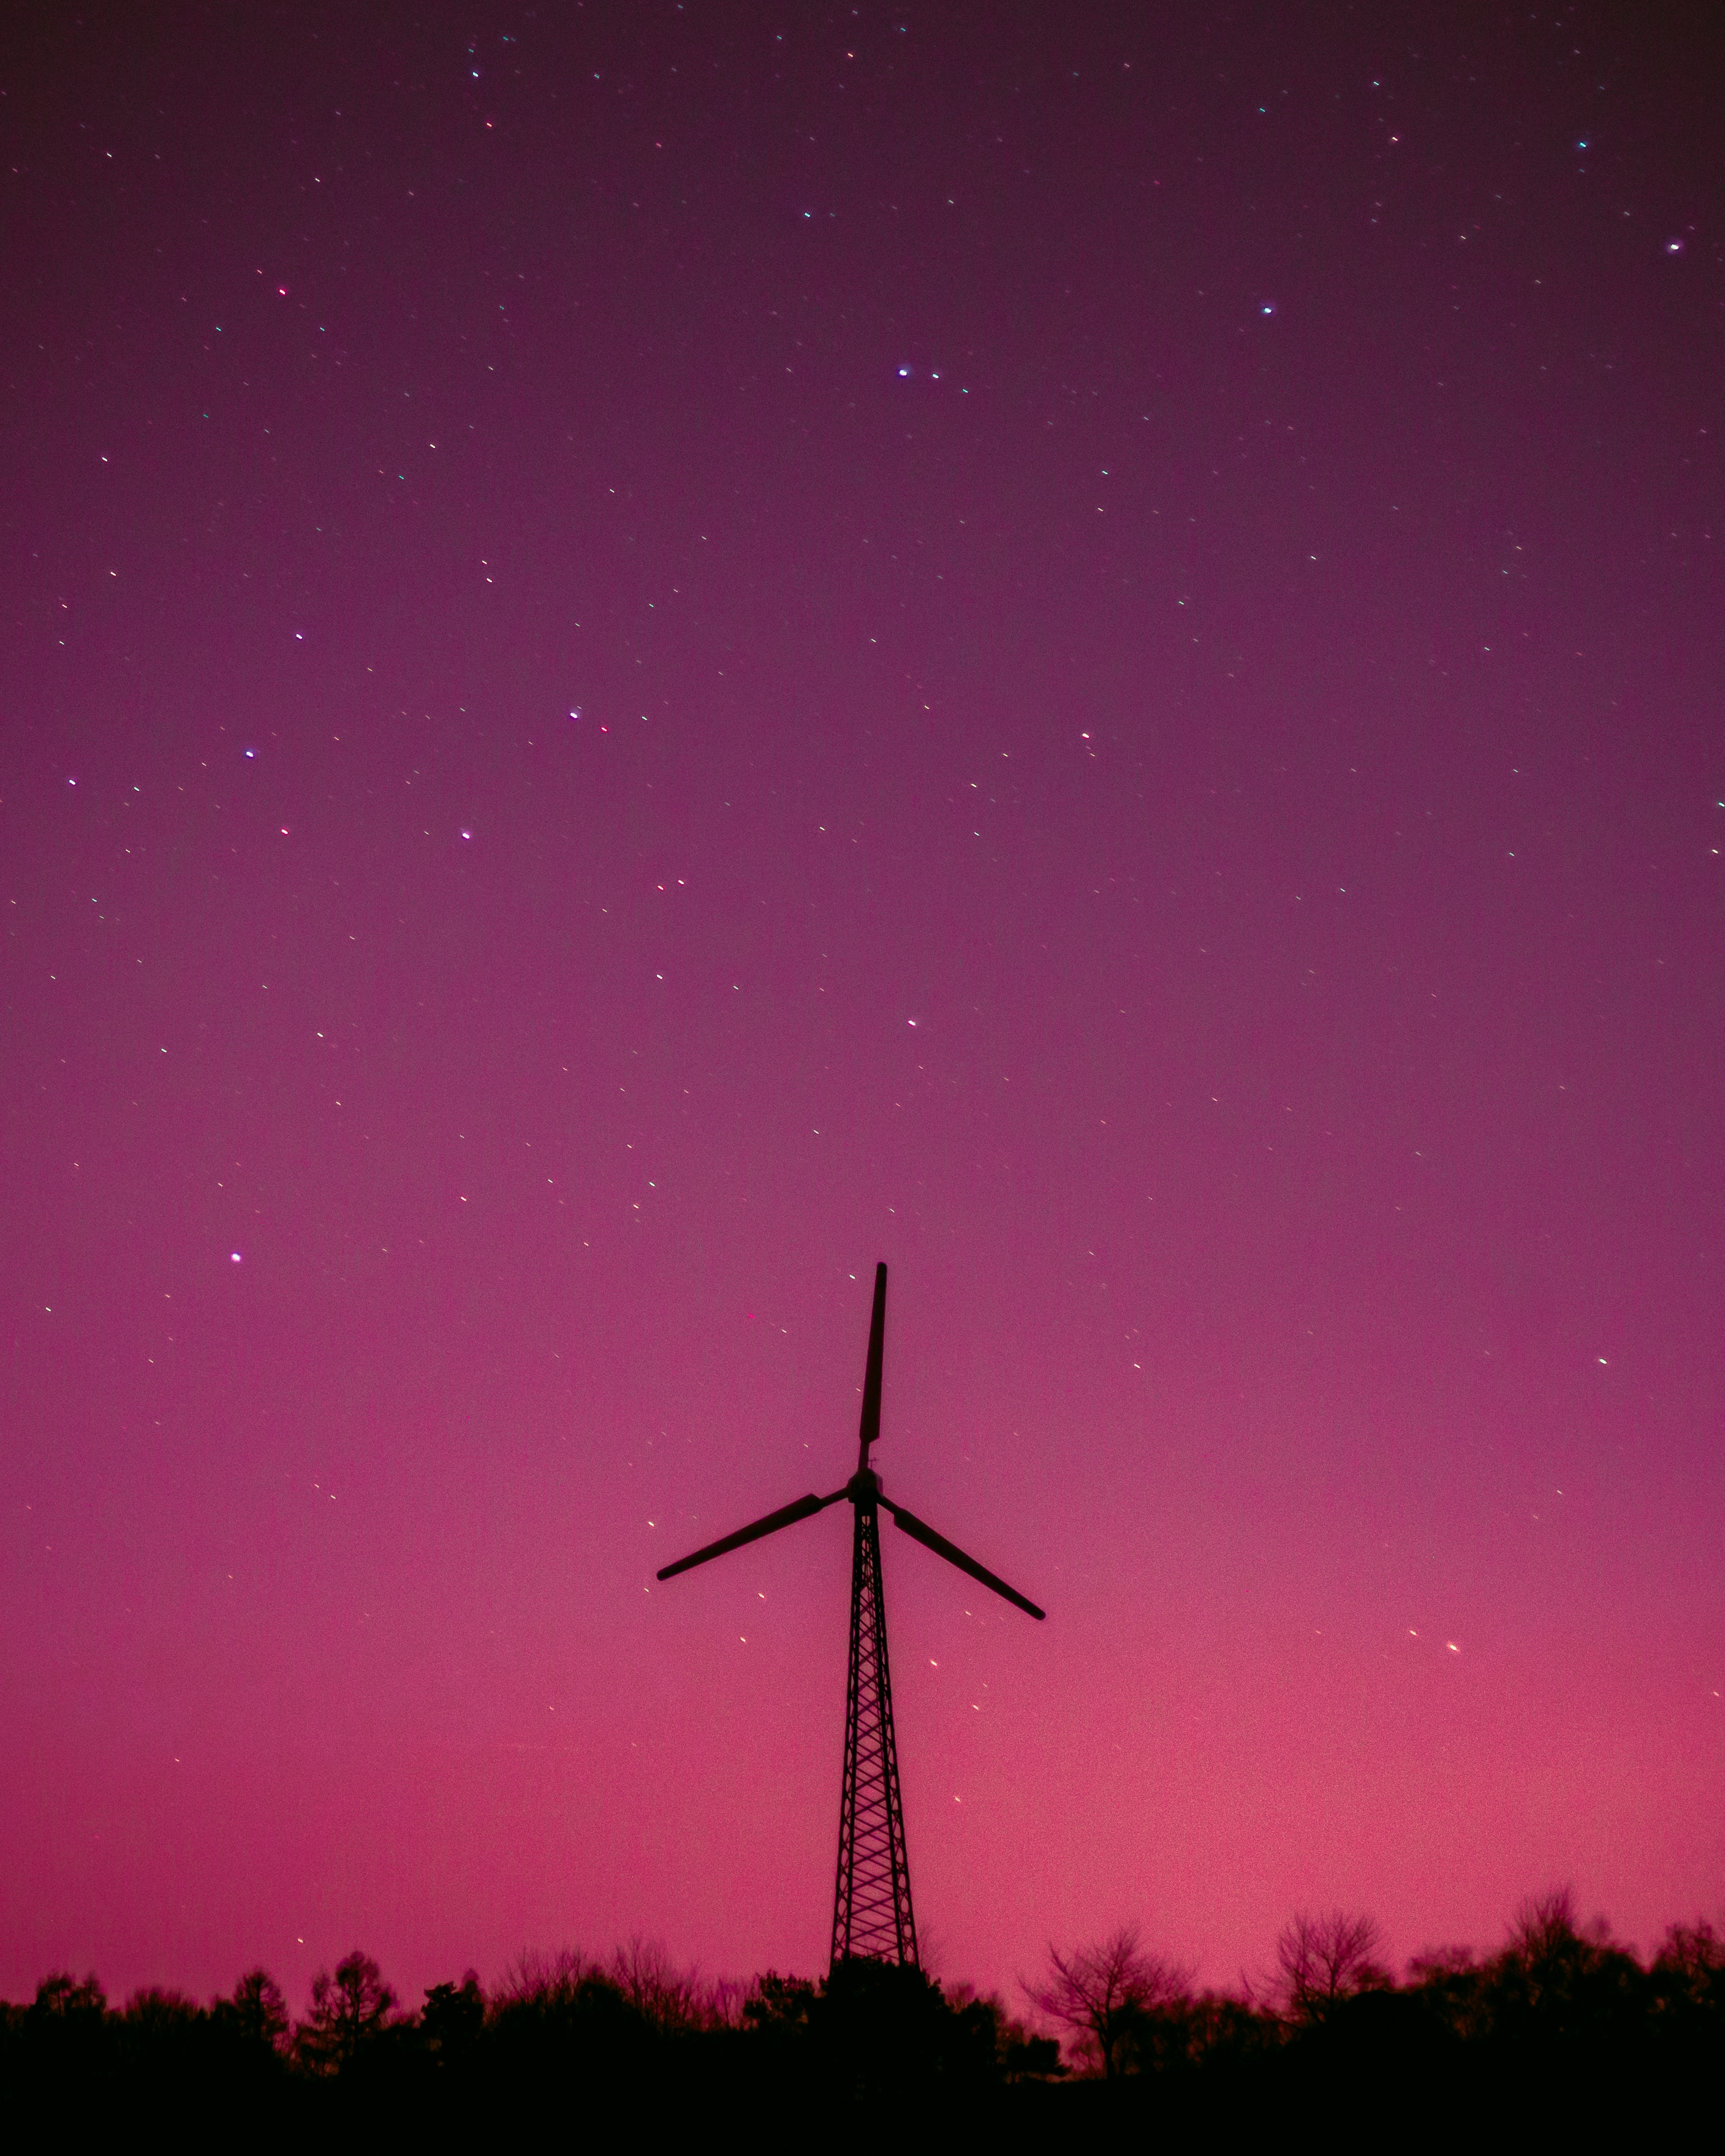 miscellanea, miscellaneous, starry sky, tower, motor, engine, windmill